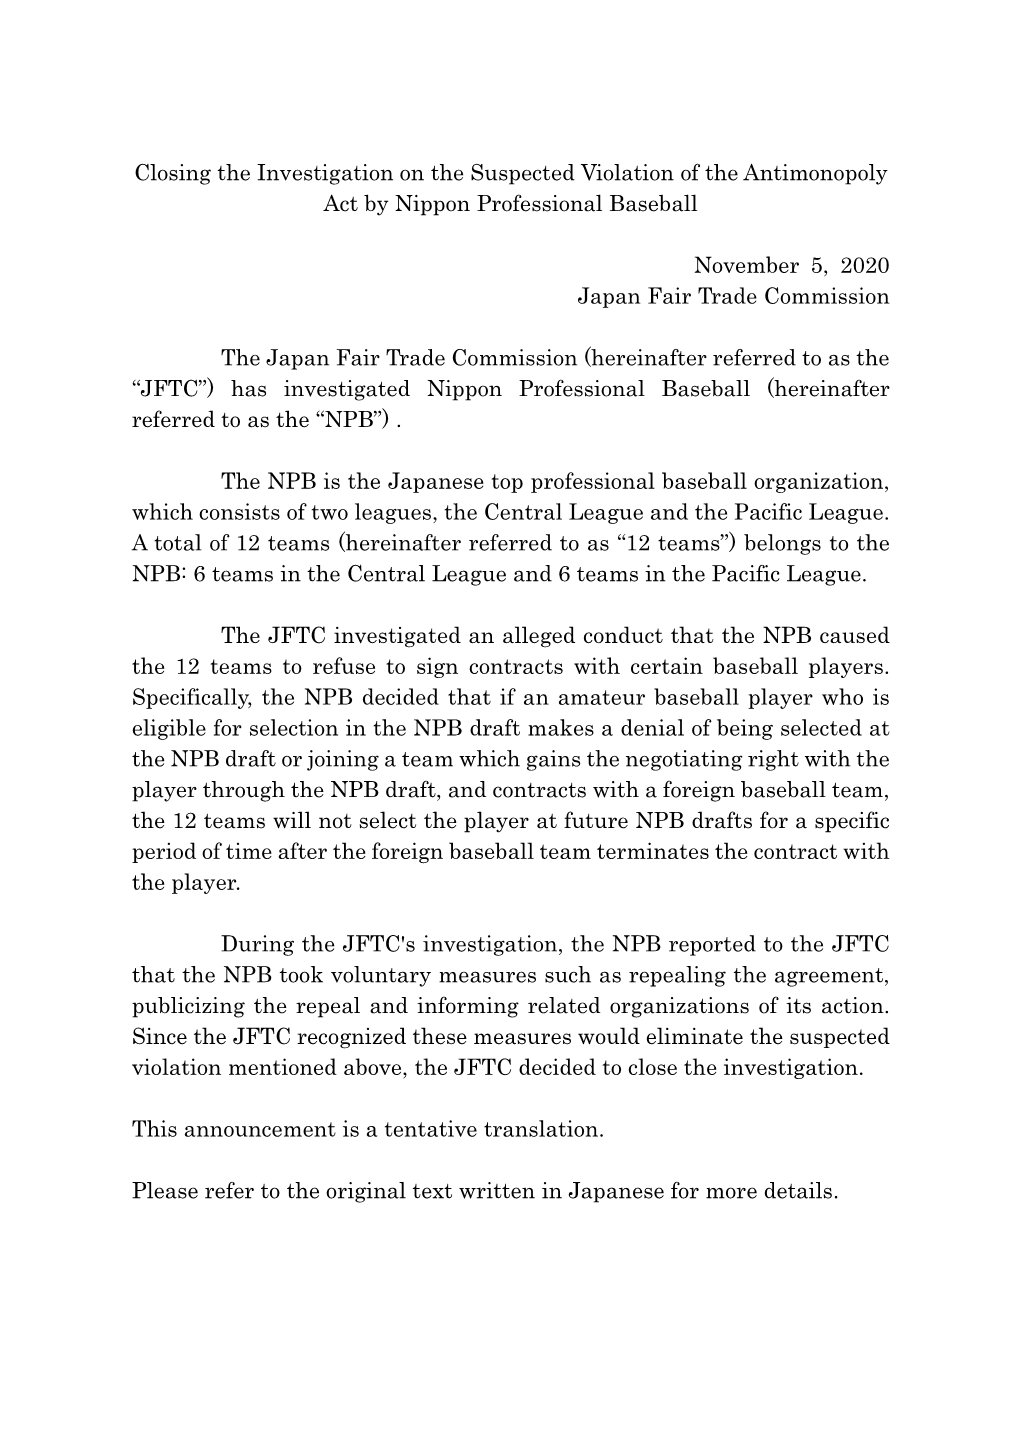 Closing the Investigation on the Suspected Violation of the Antimonopoly Act by Nippon Professional Baseball